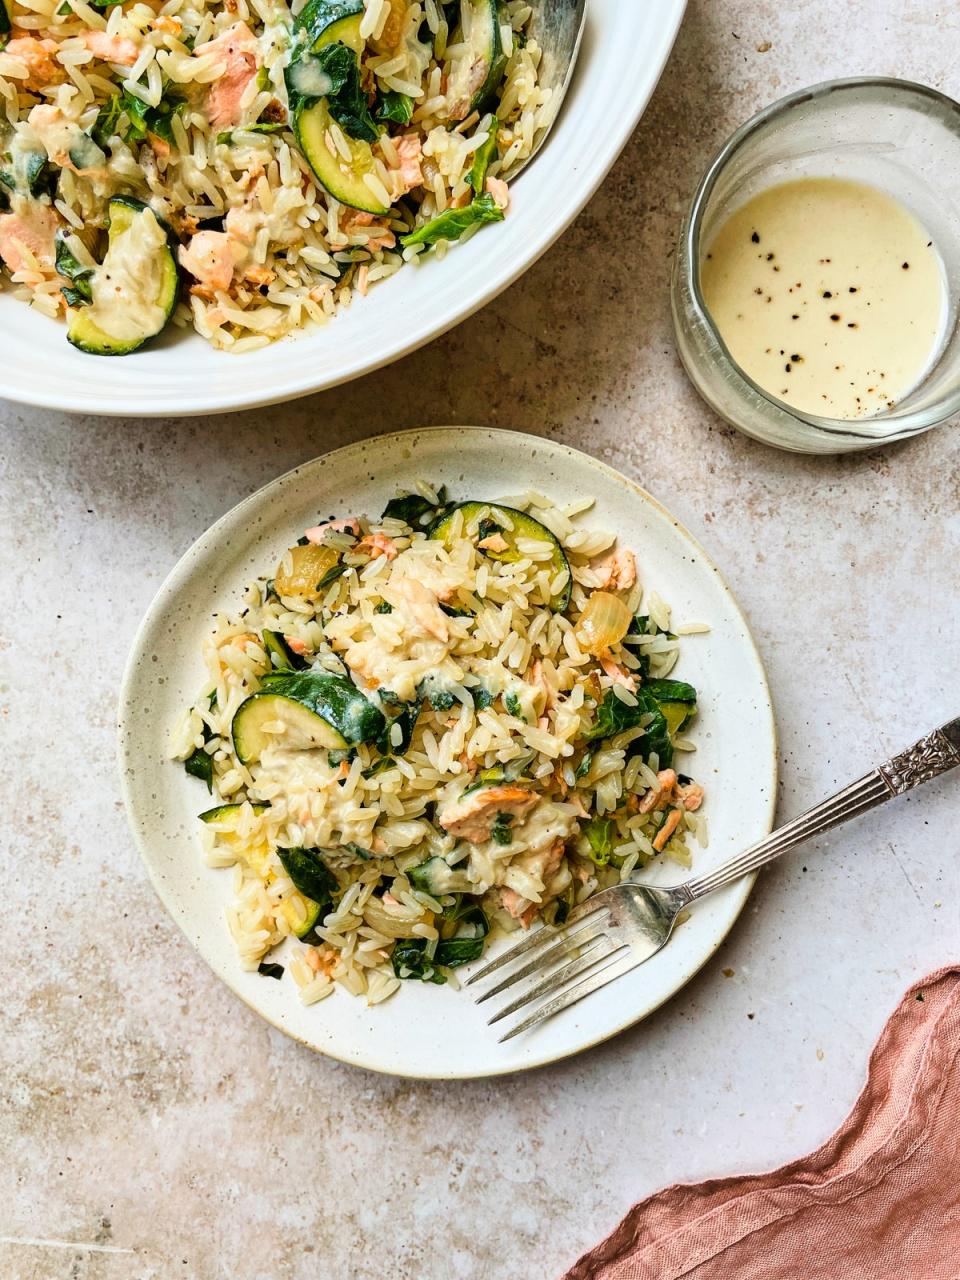 Break out of the recipe rut with this fresh salad (Rice Association)